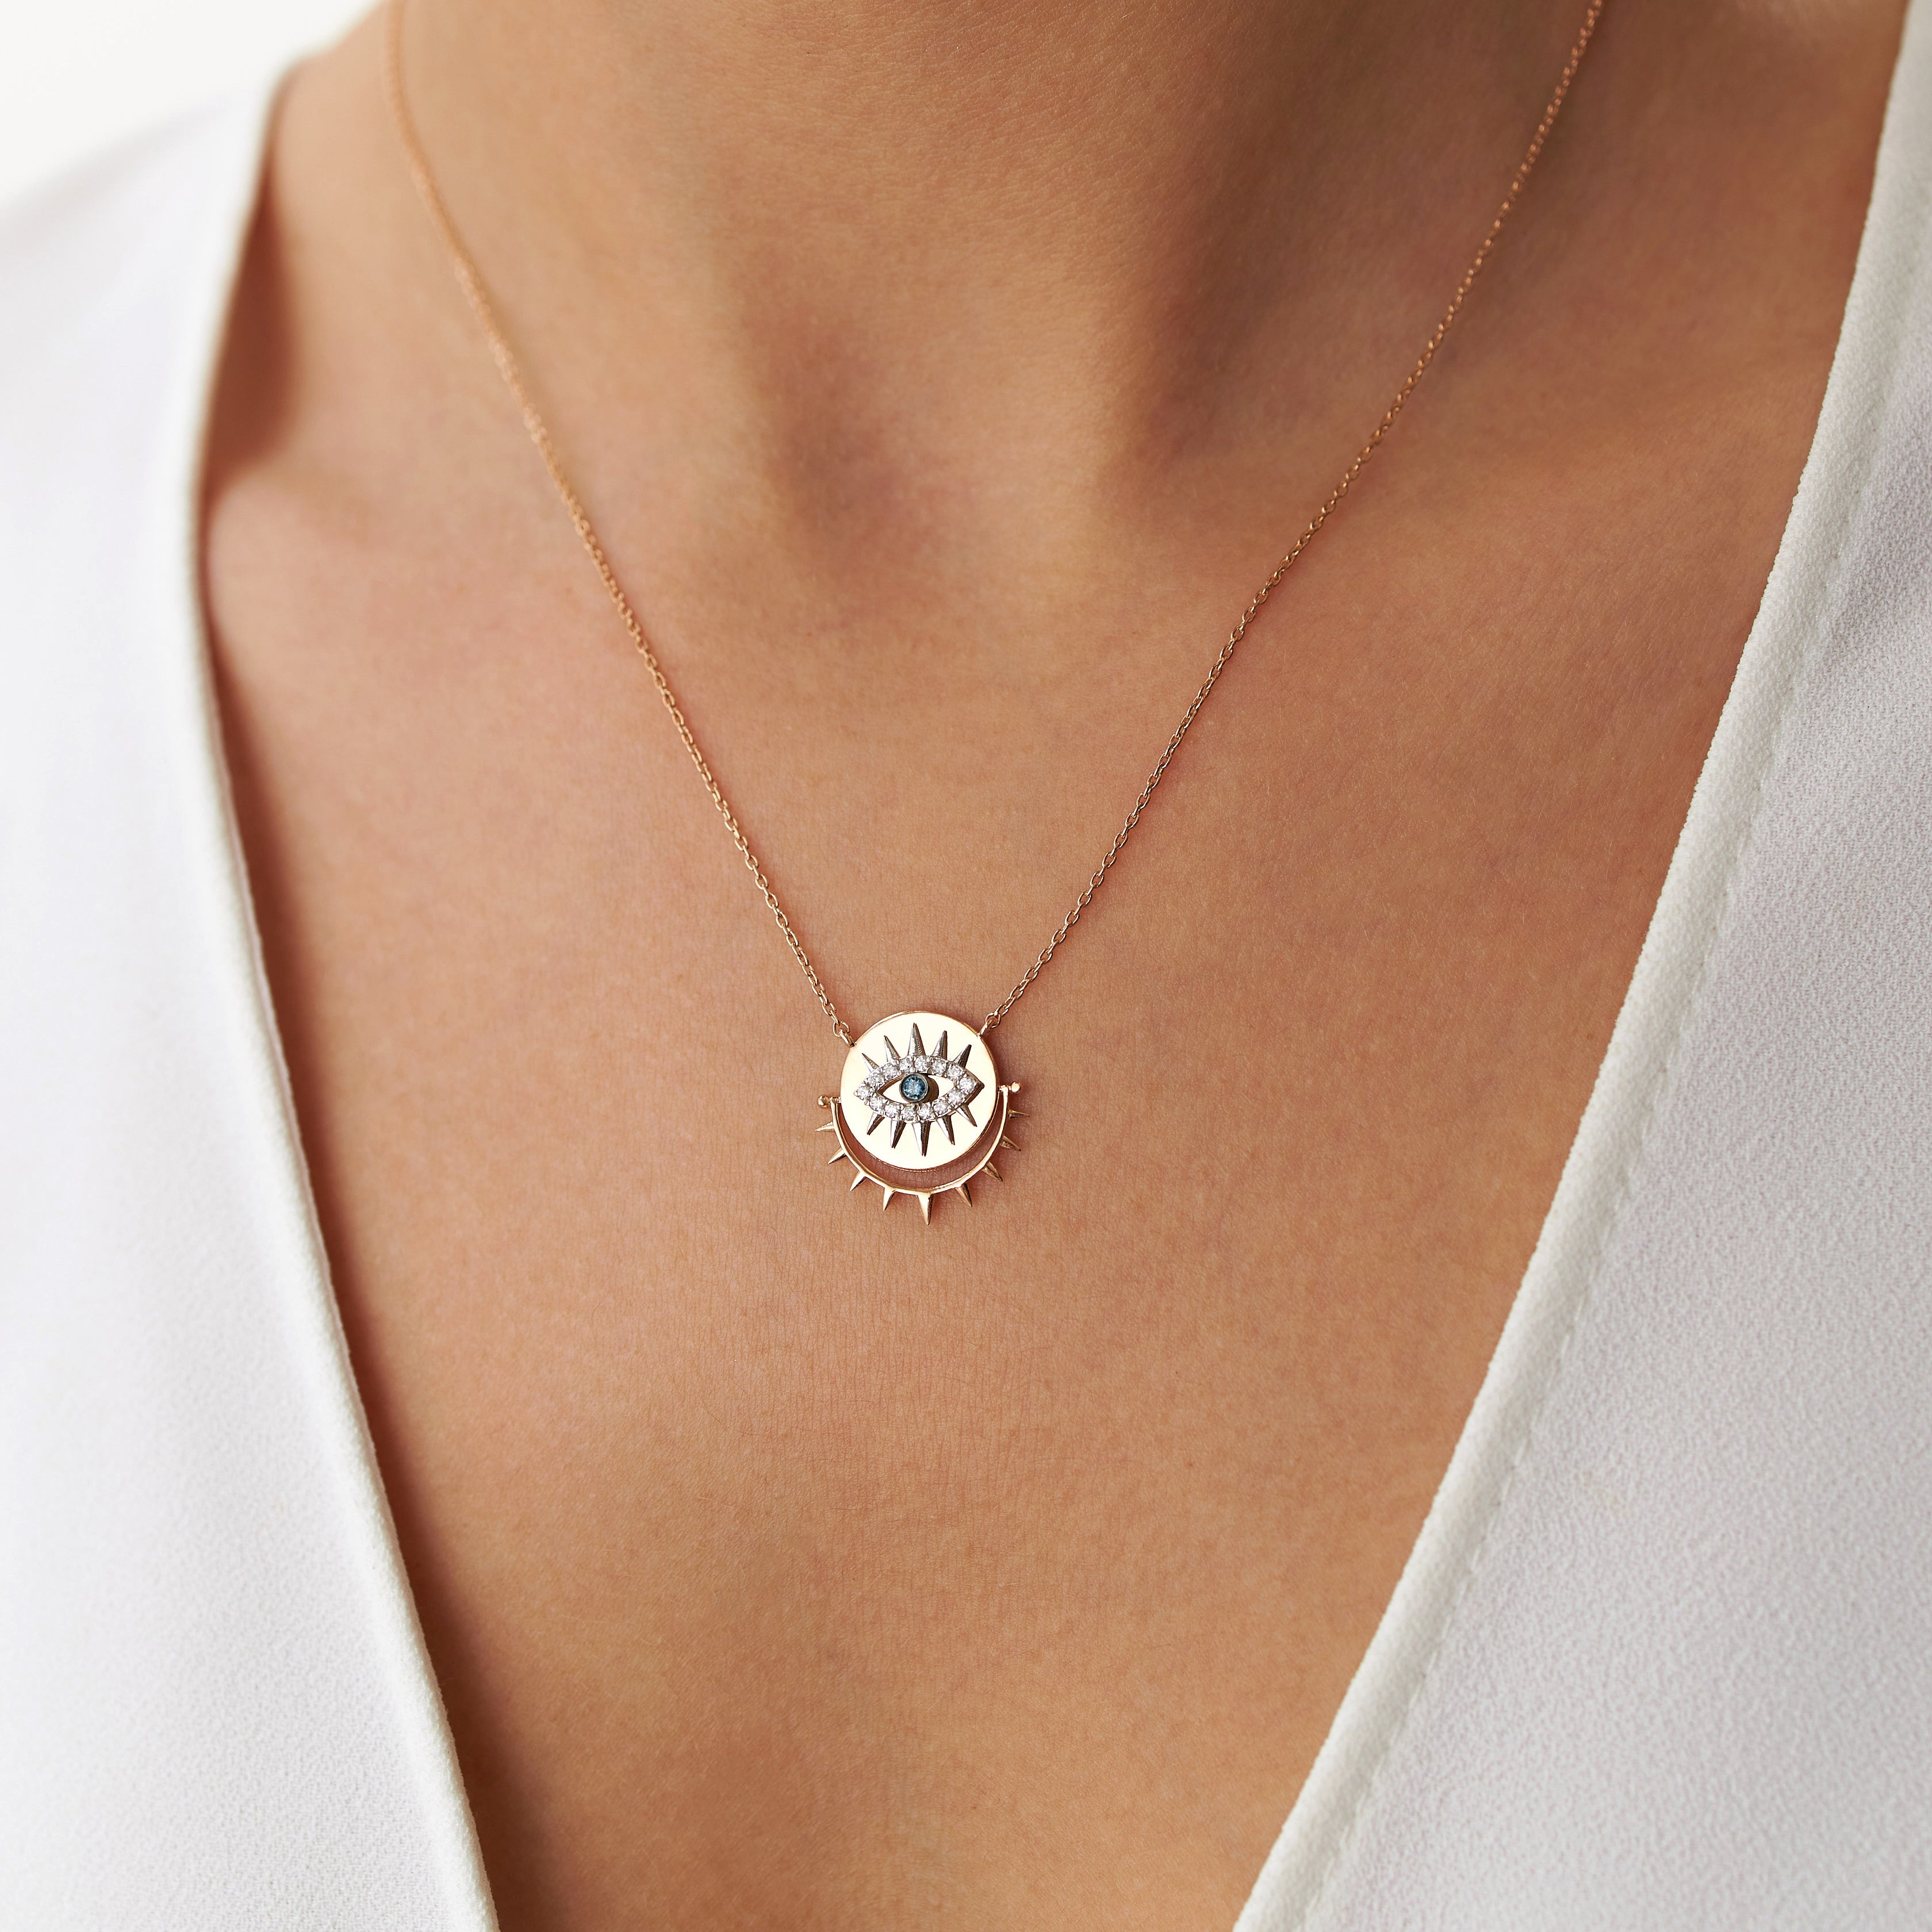 Diamond Spiked Eye Necklace Available in 14K and 18K Gold